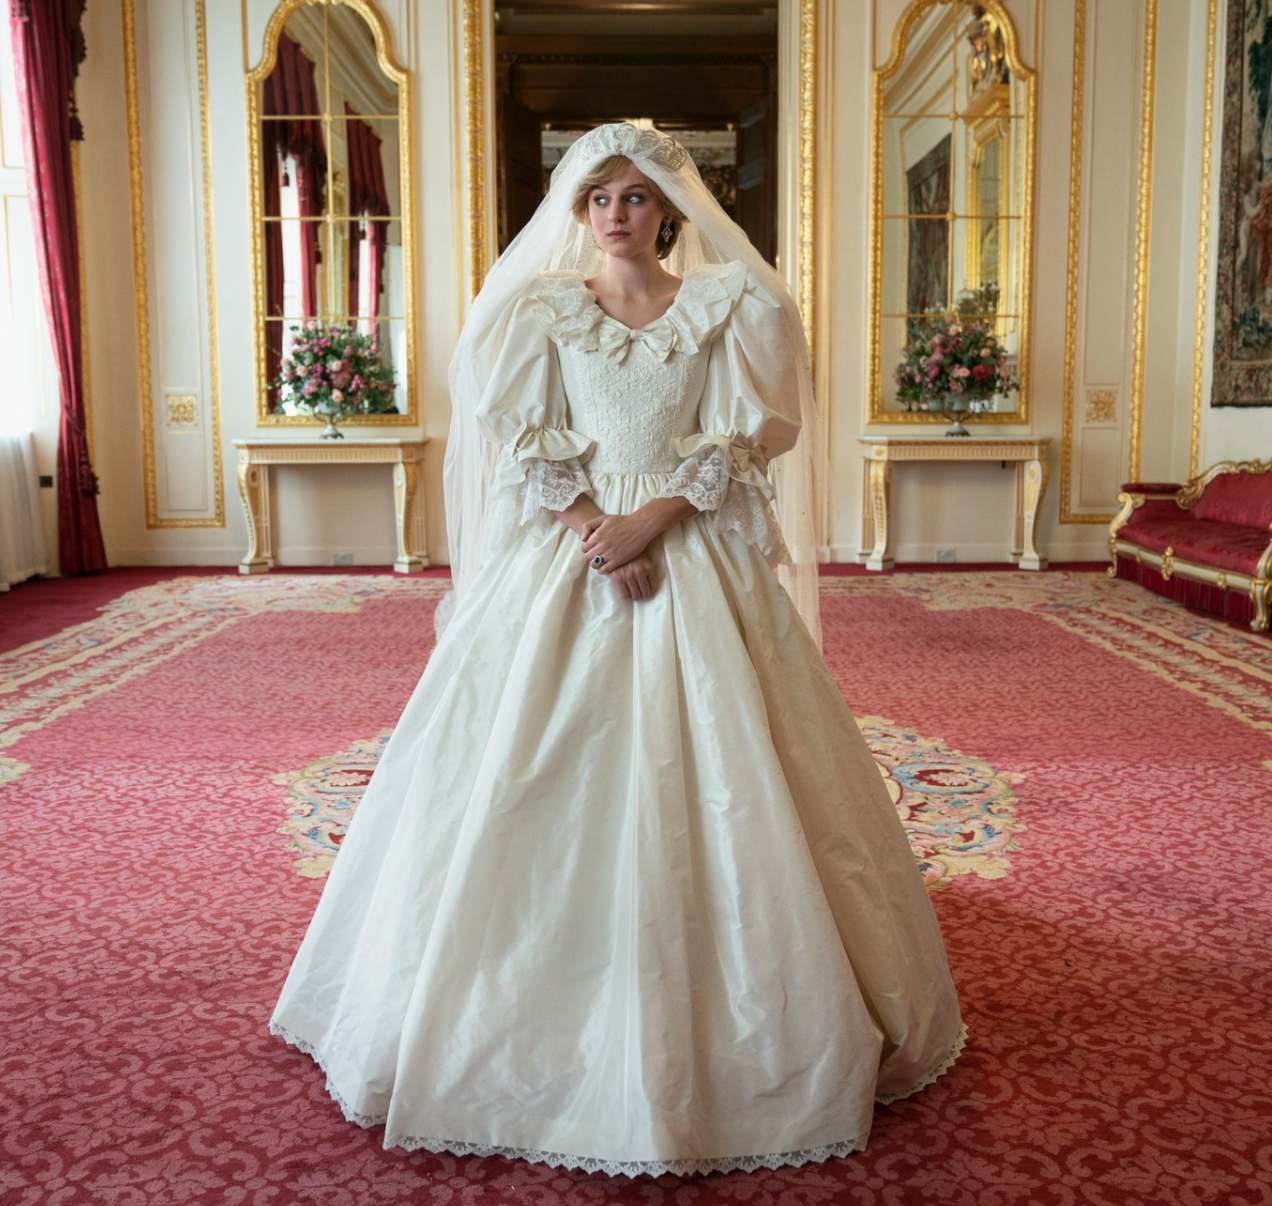 Heres Your First Look at Princess Dianas Wedding Dress in The Crown image pic